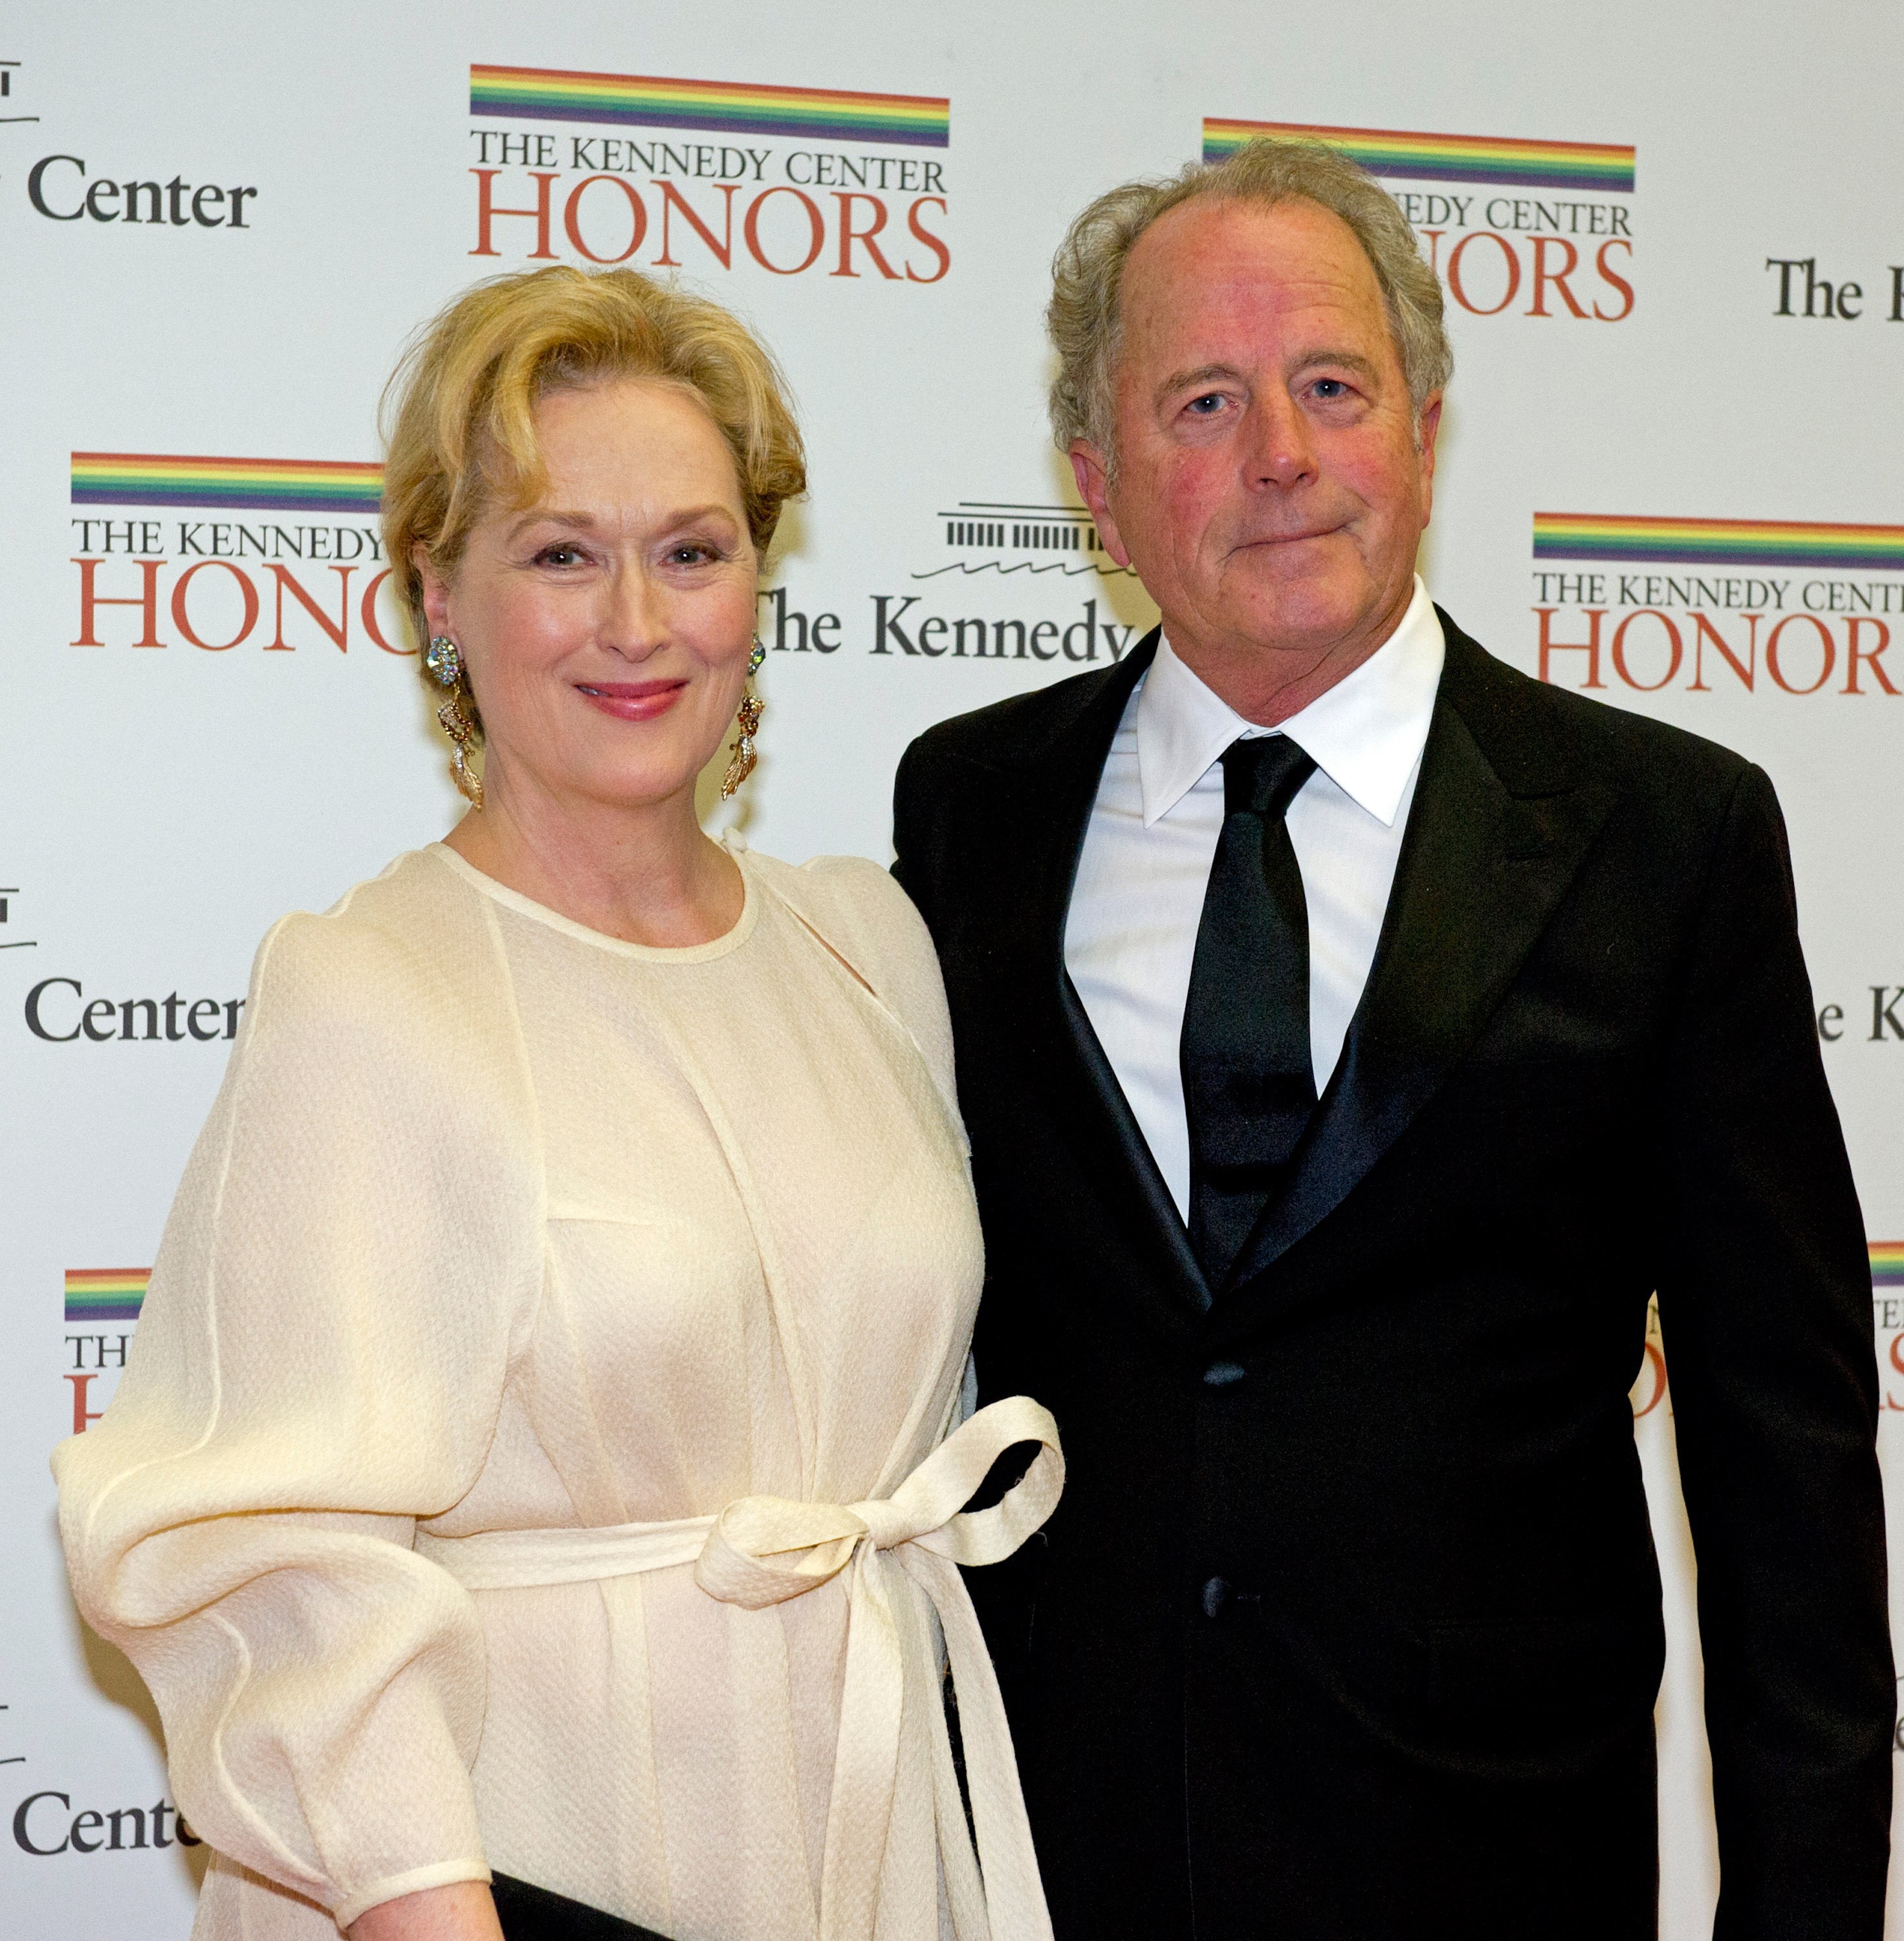 Meryl Streep and Don Gummer at a dinner for Kennedy honorees at the U.S. Department of State on December 1, 2012 in Washington, DC. | Source: Getty Images